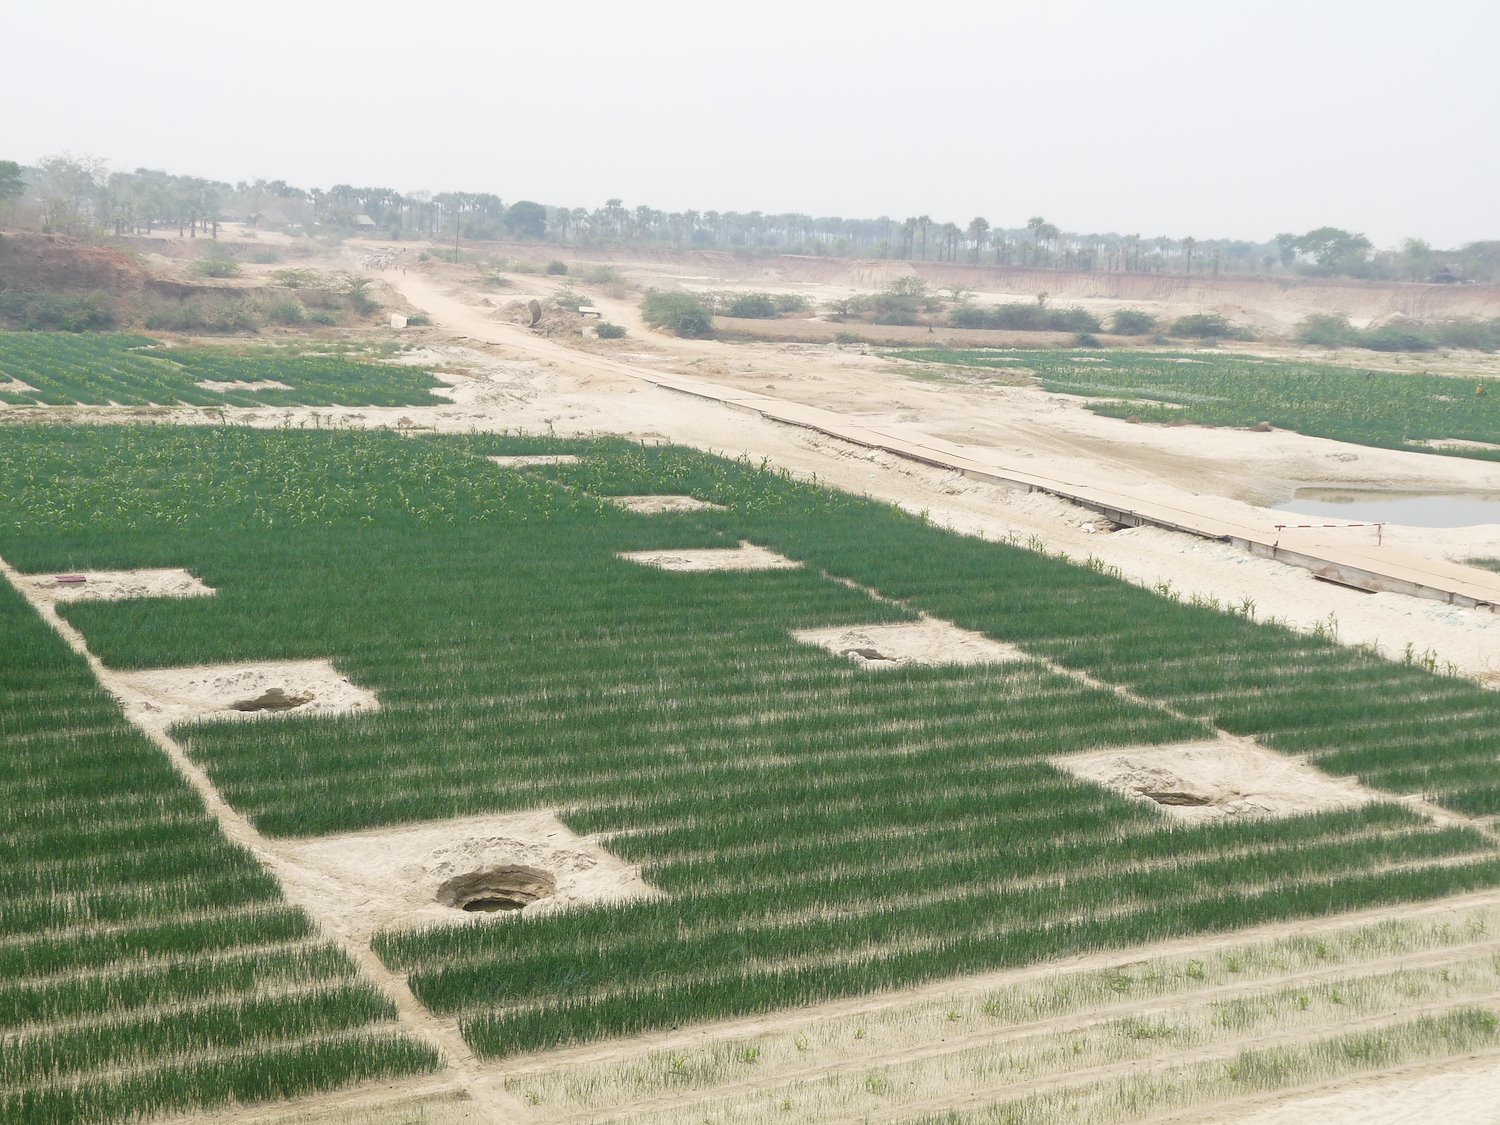 Dug wells and crop cultivation in the bed of a river in Myanmar's Dry Zone